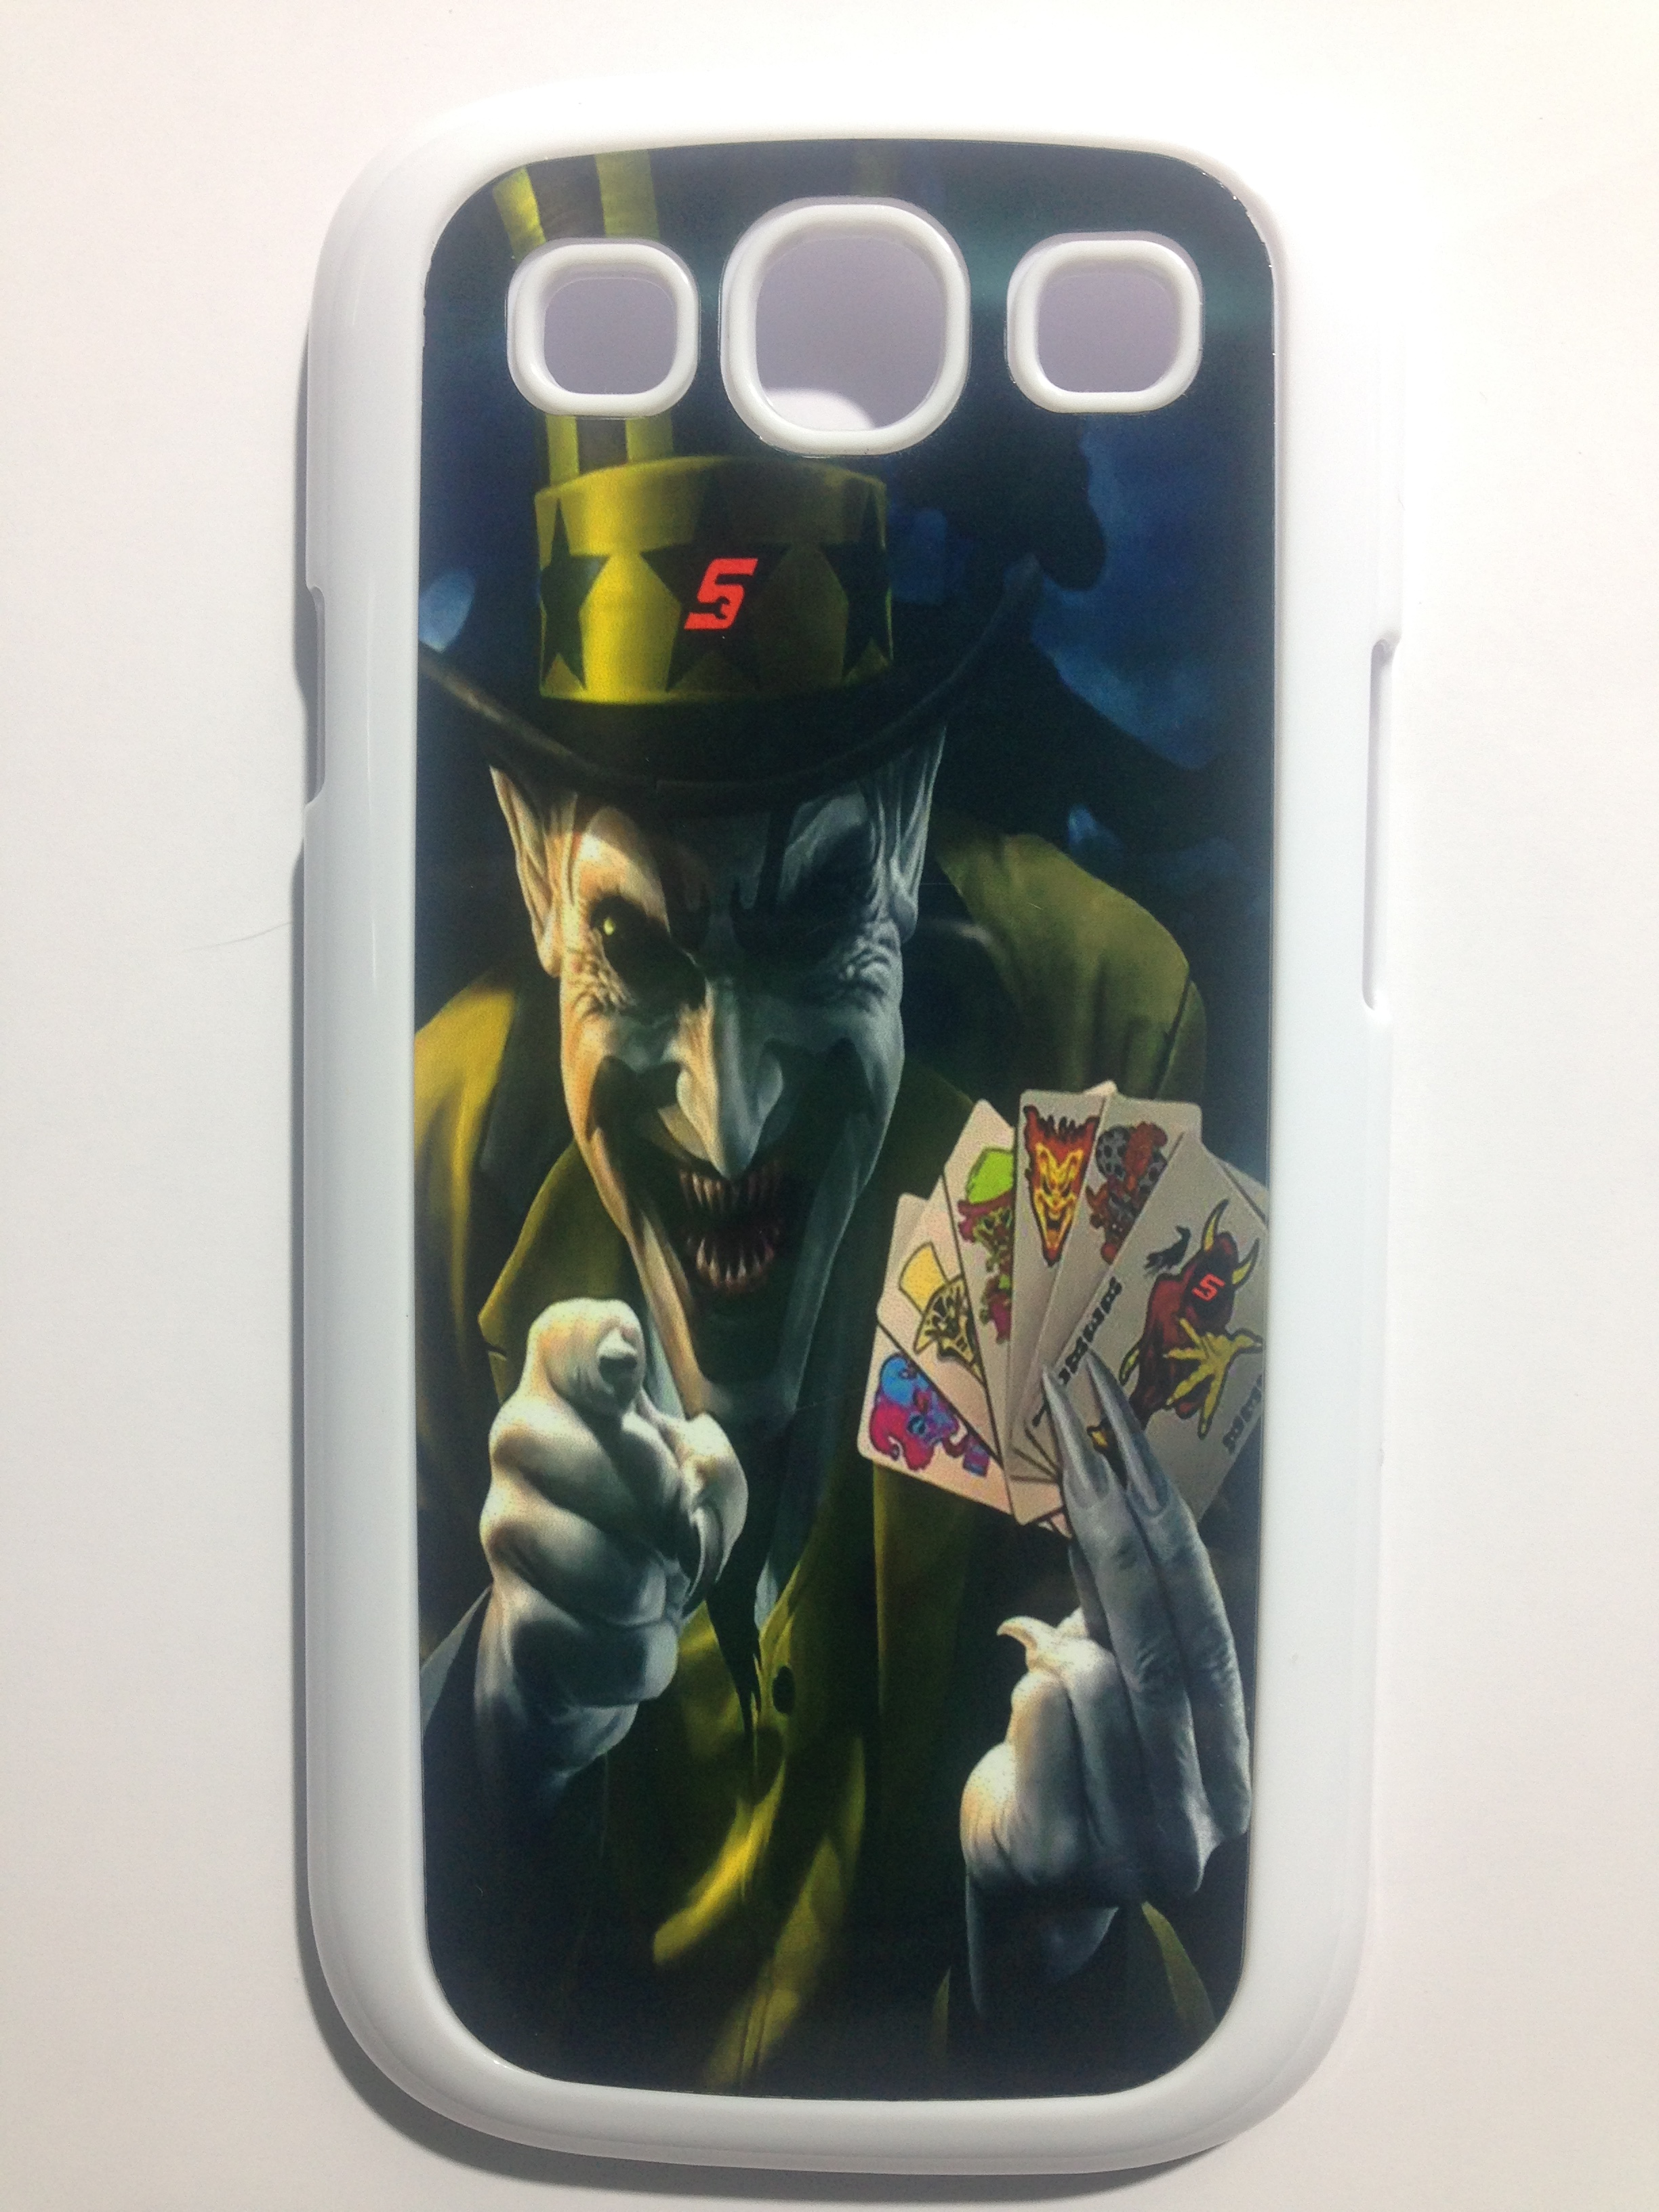 Samsung S3 made with sublimation printing